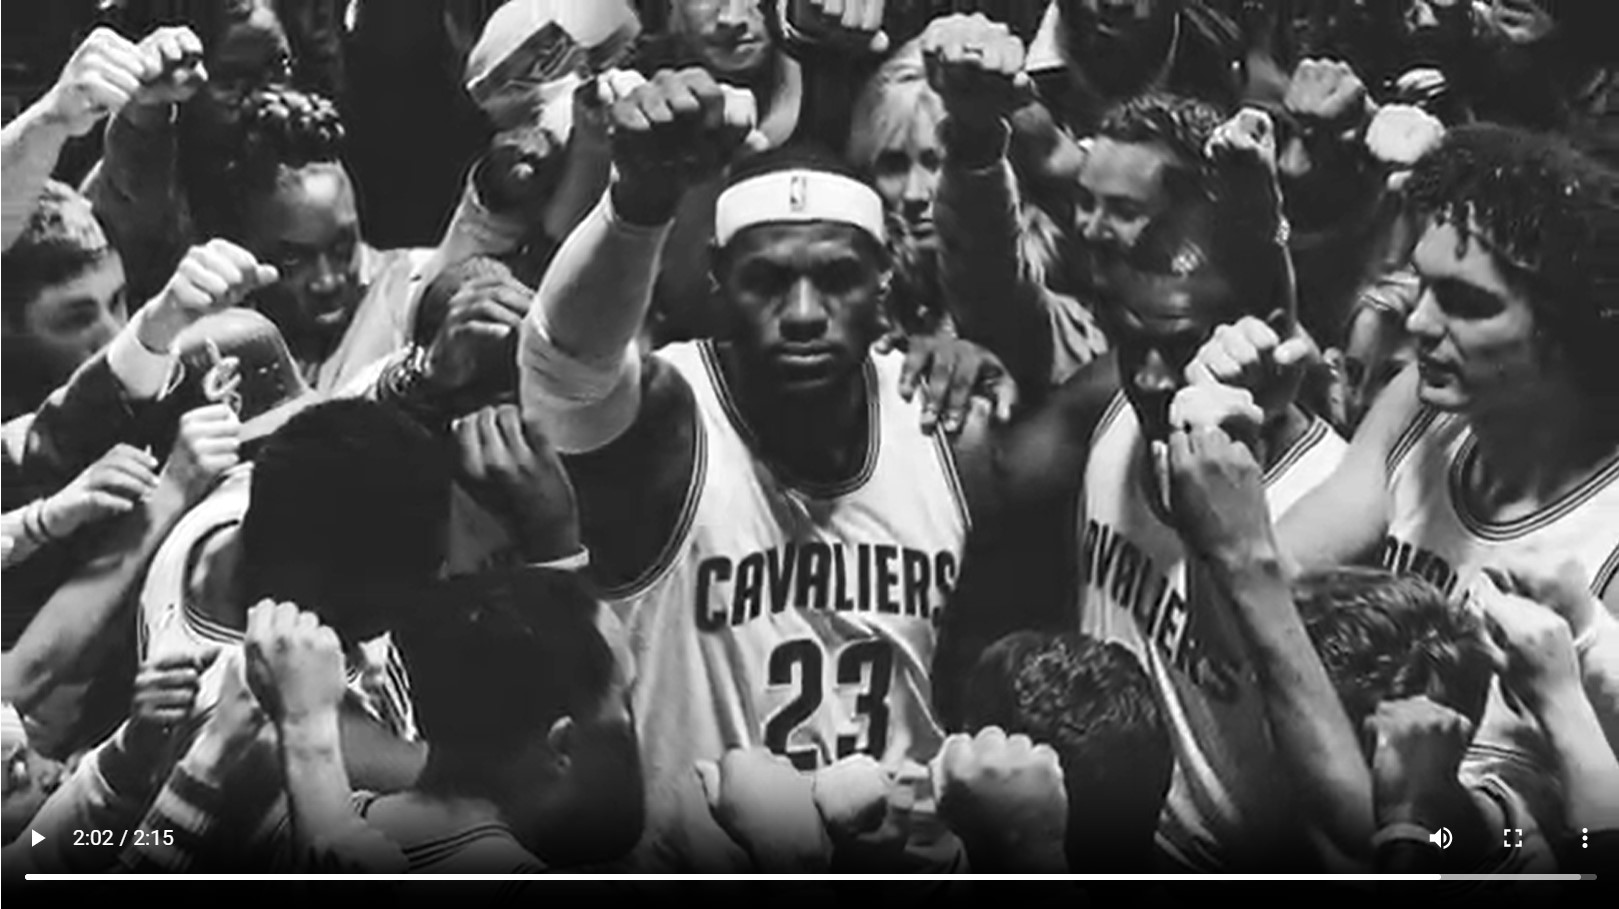 LeBron James New Nike Commercial